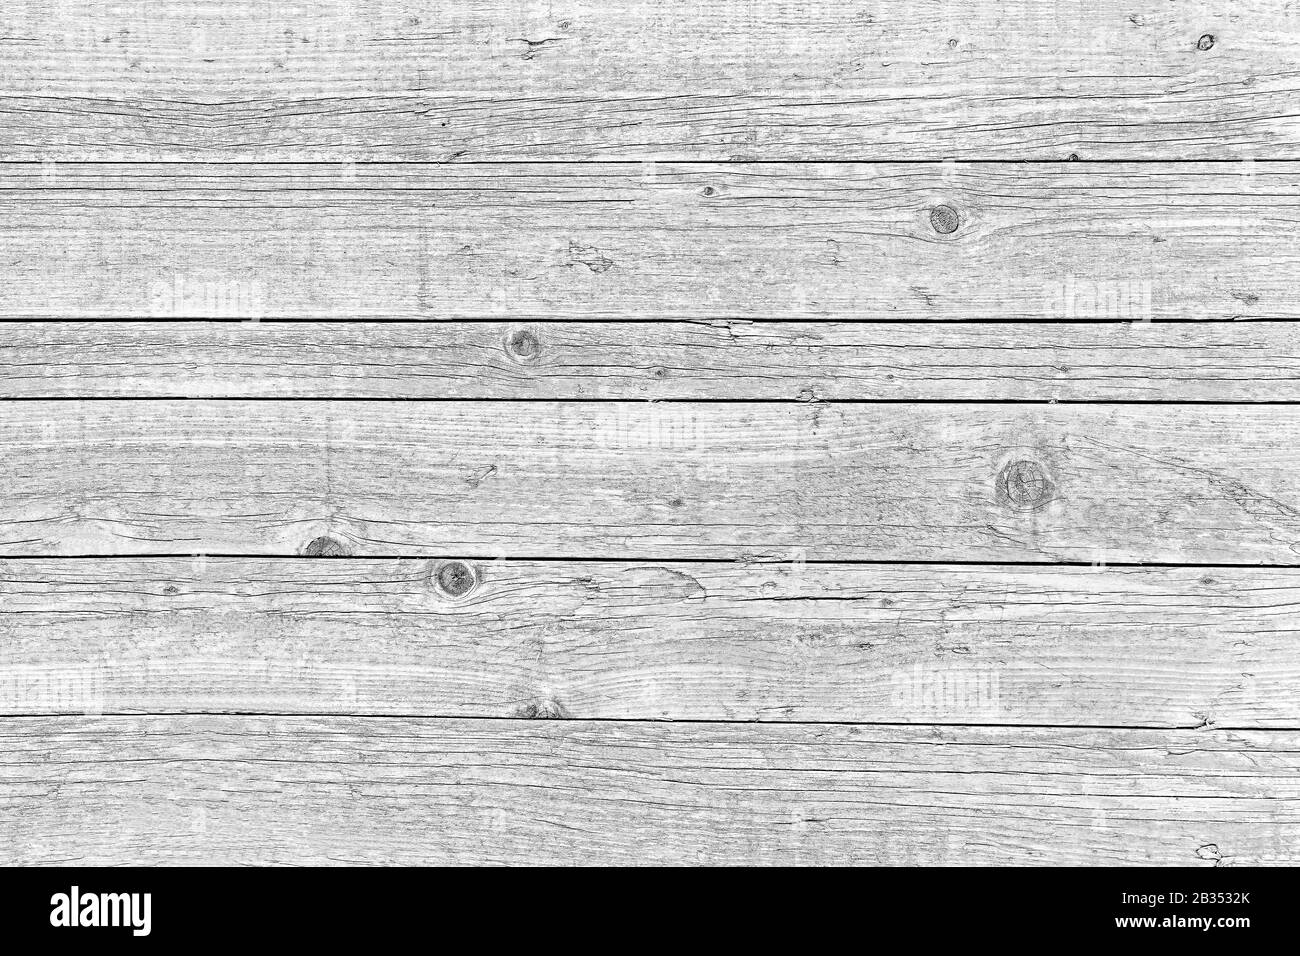 Weathered Wooden Slats Grunge Background: tabletop grunge closeup view of bleached wooden slats Stock Photo